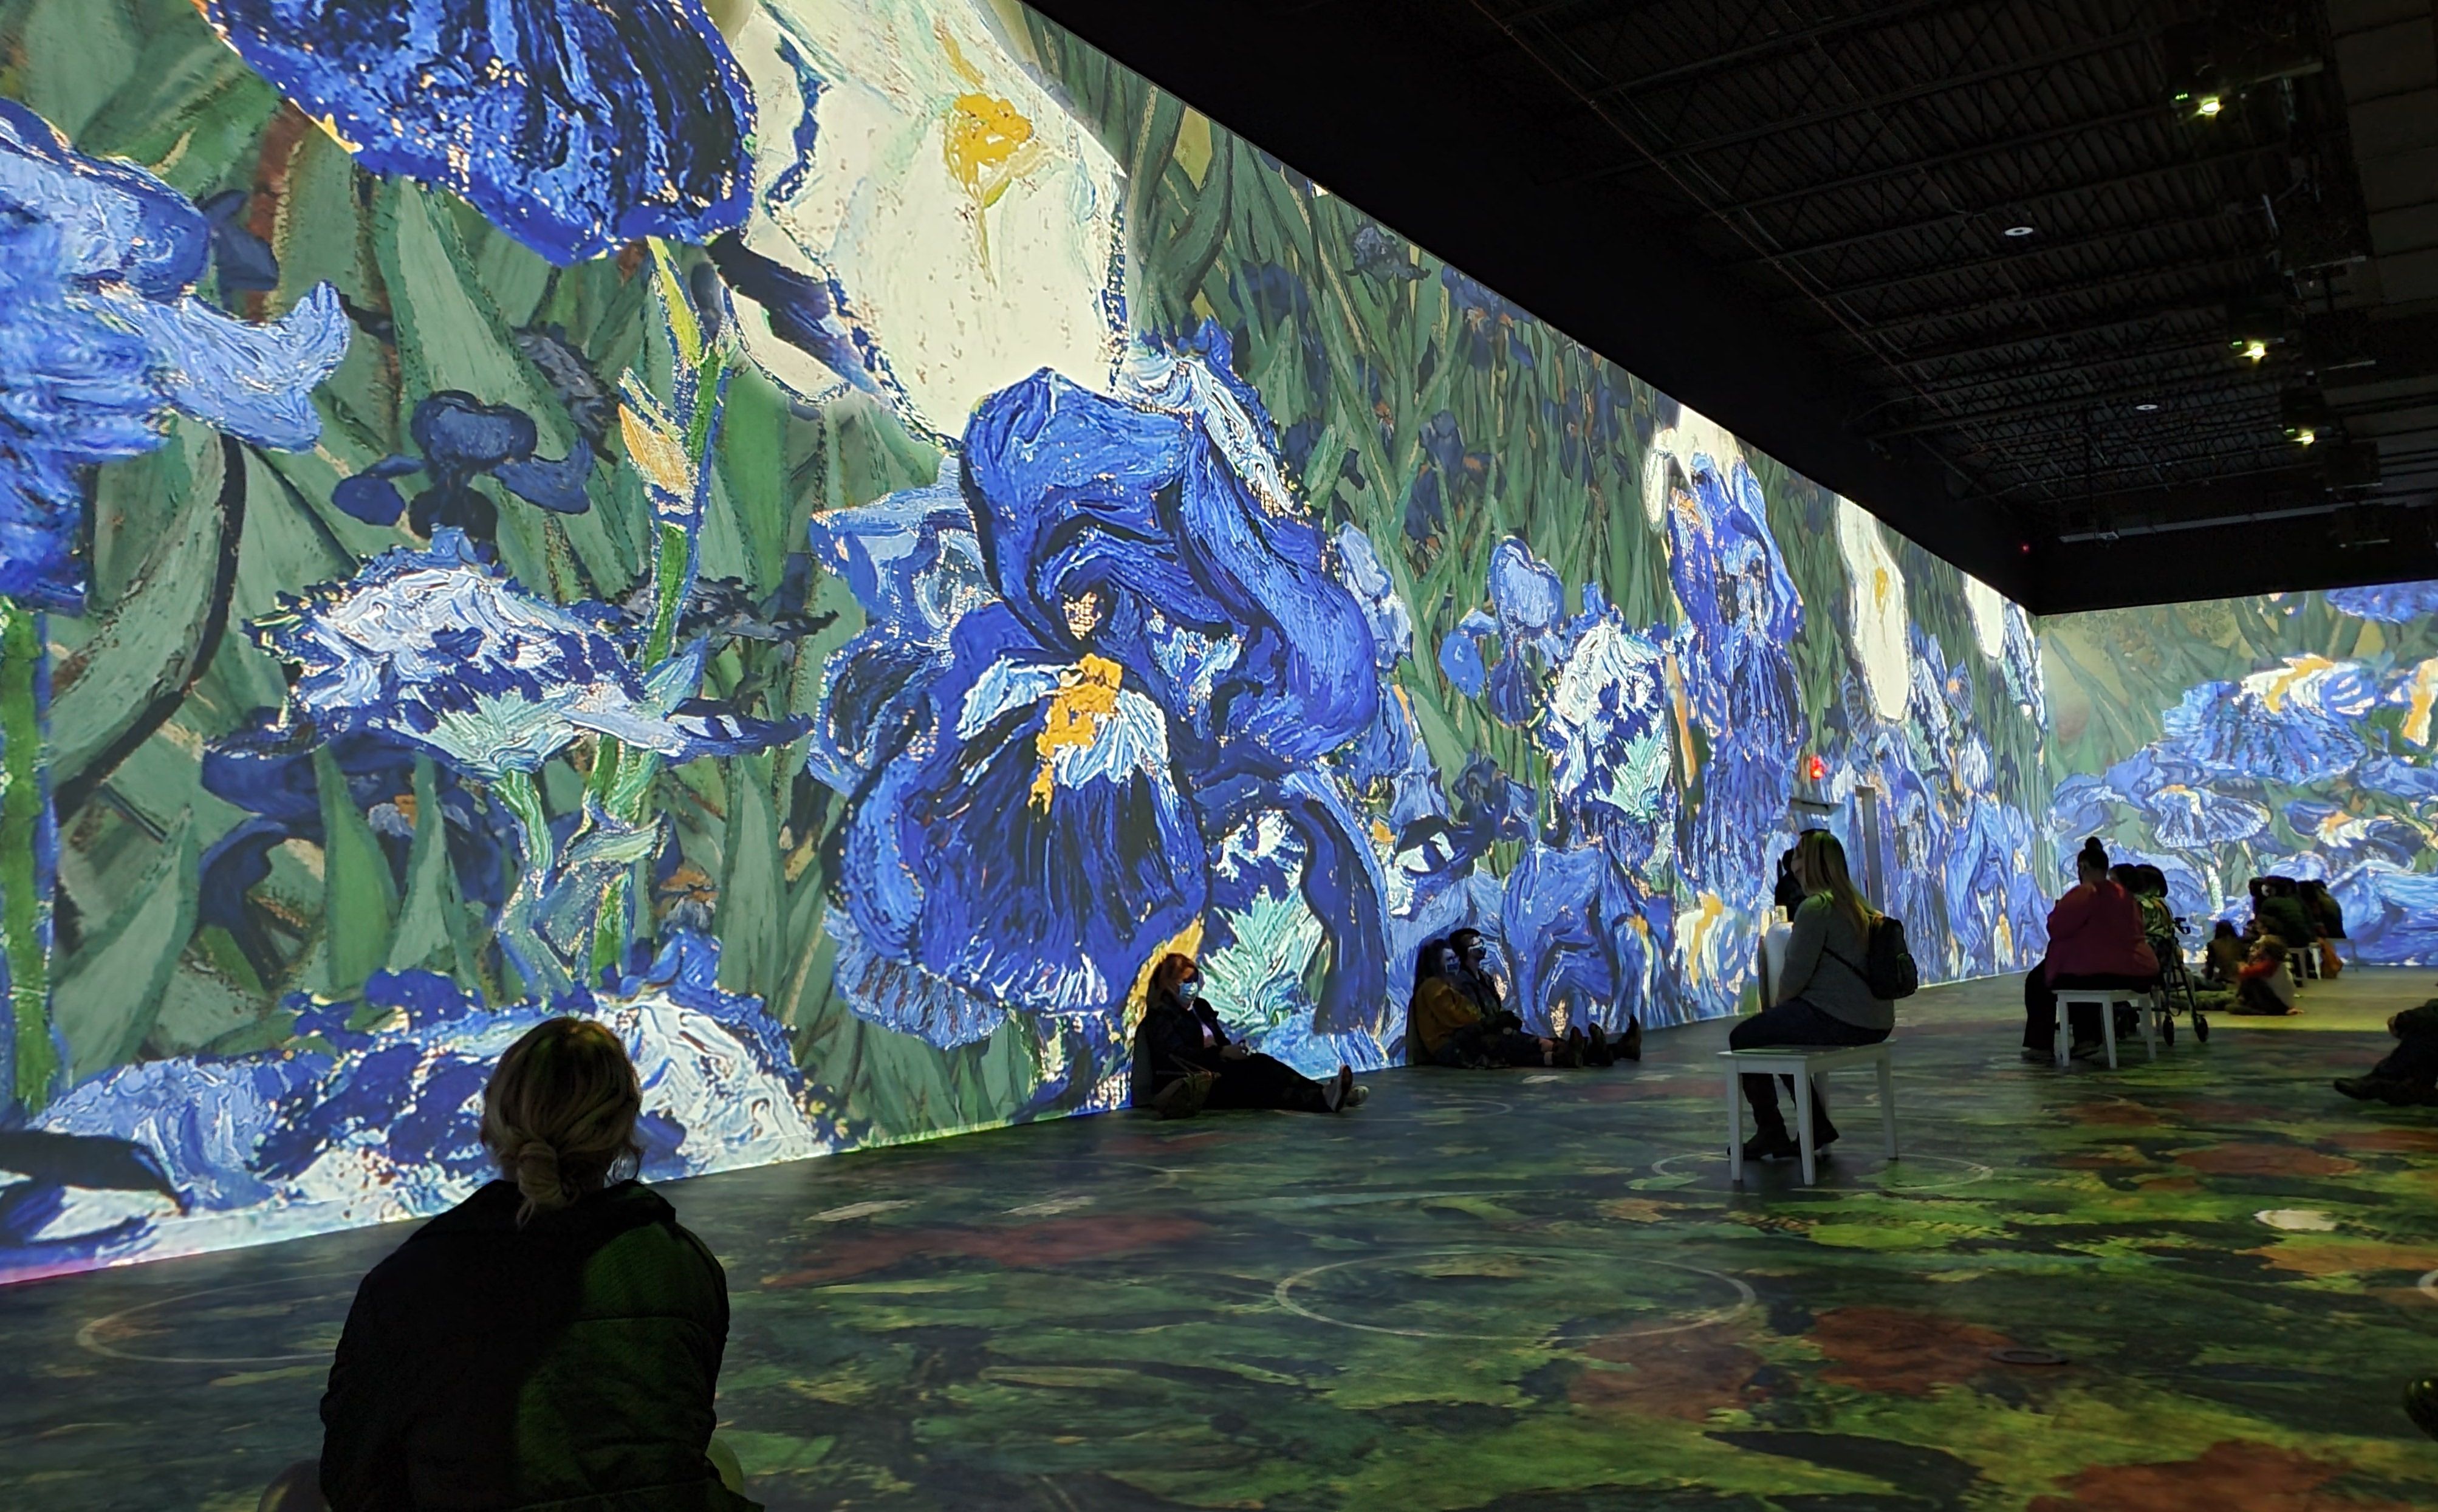 Van Gogh's "Irises" painting is cast onto a wall as people sit on benches and the floor observing it